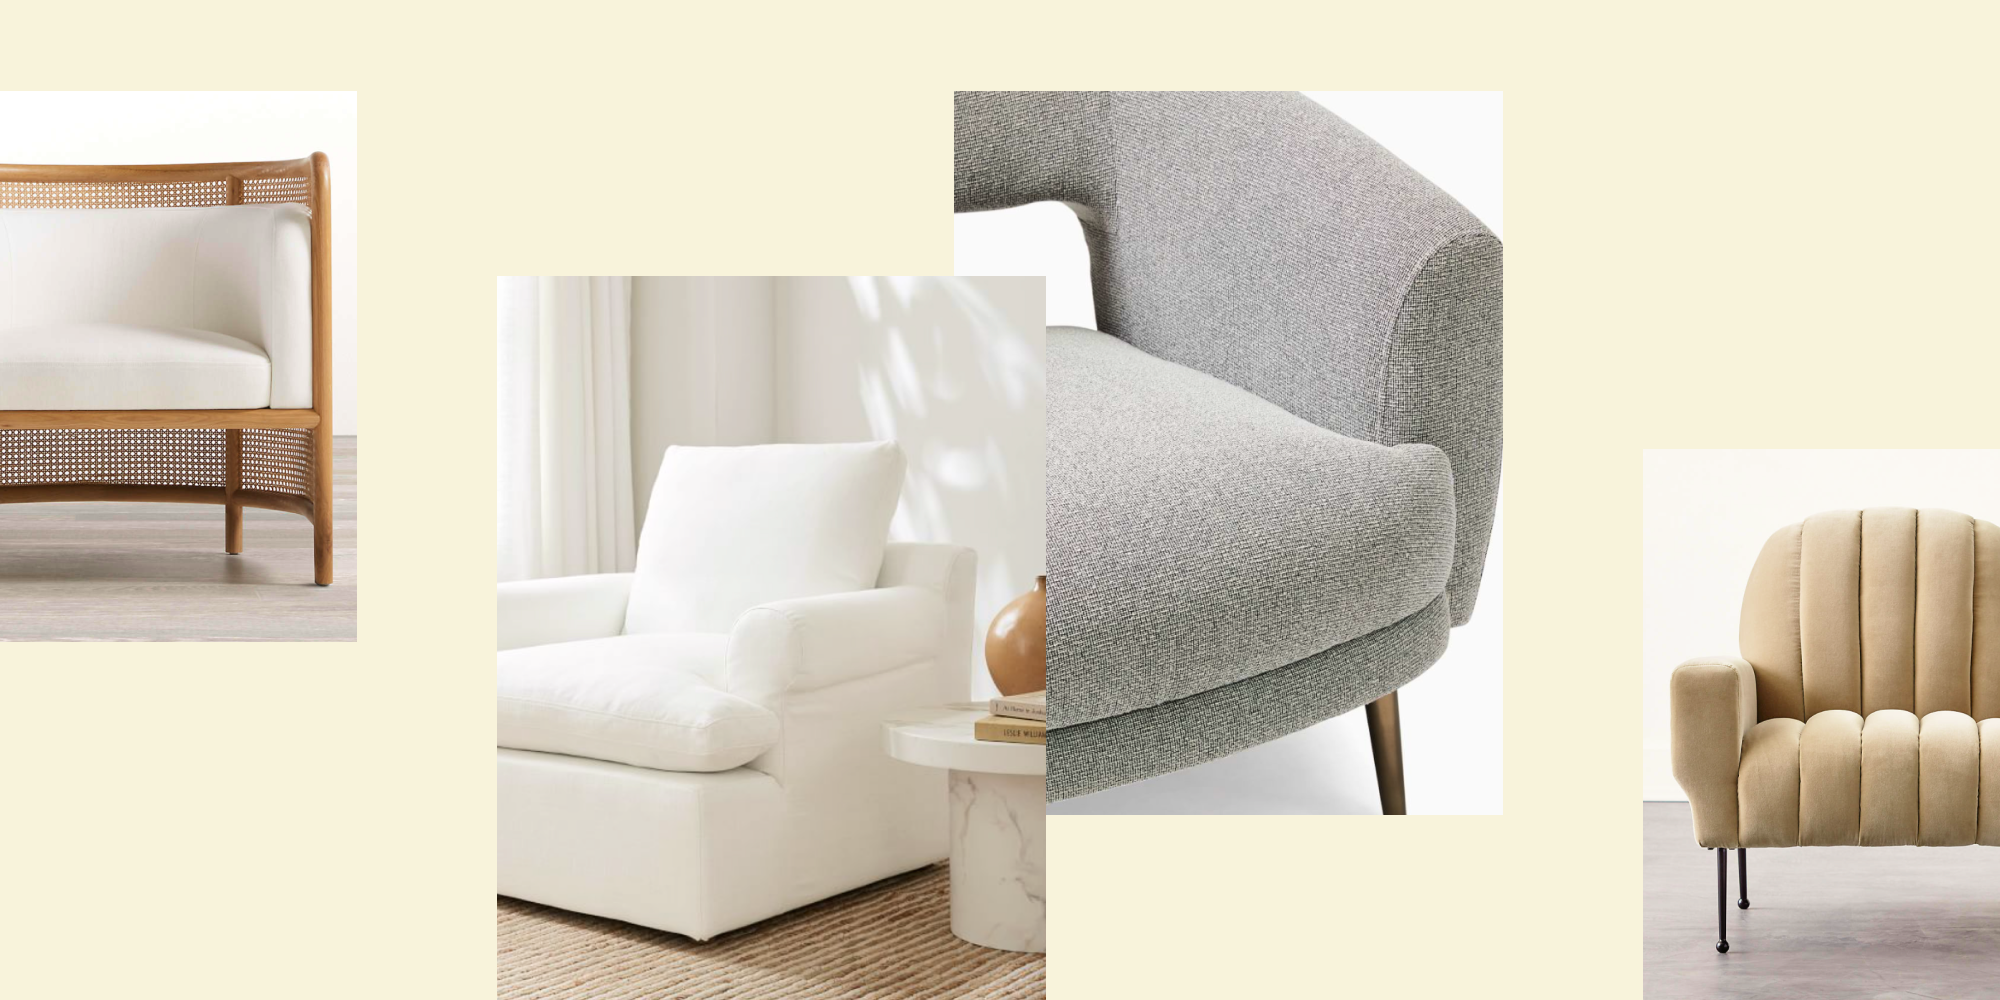 20 of the Best Cozy Chairs of 2022 to Refresh Your Home